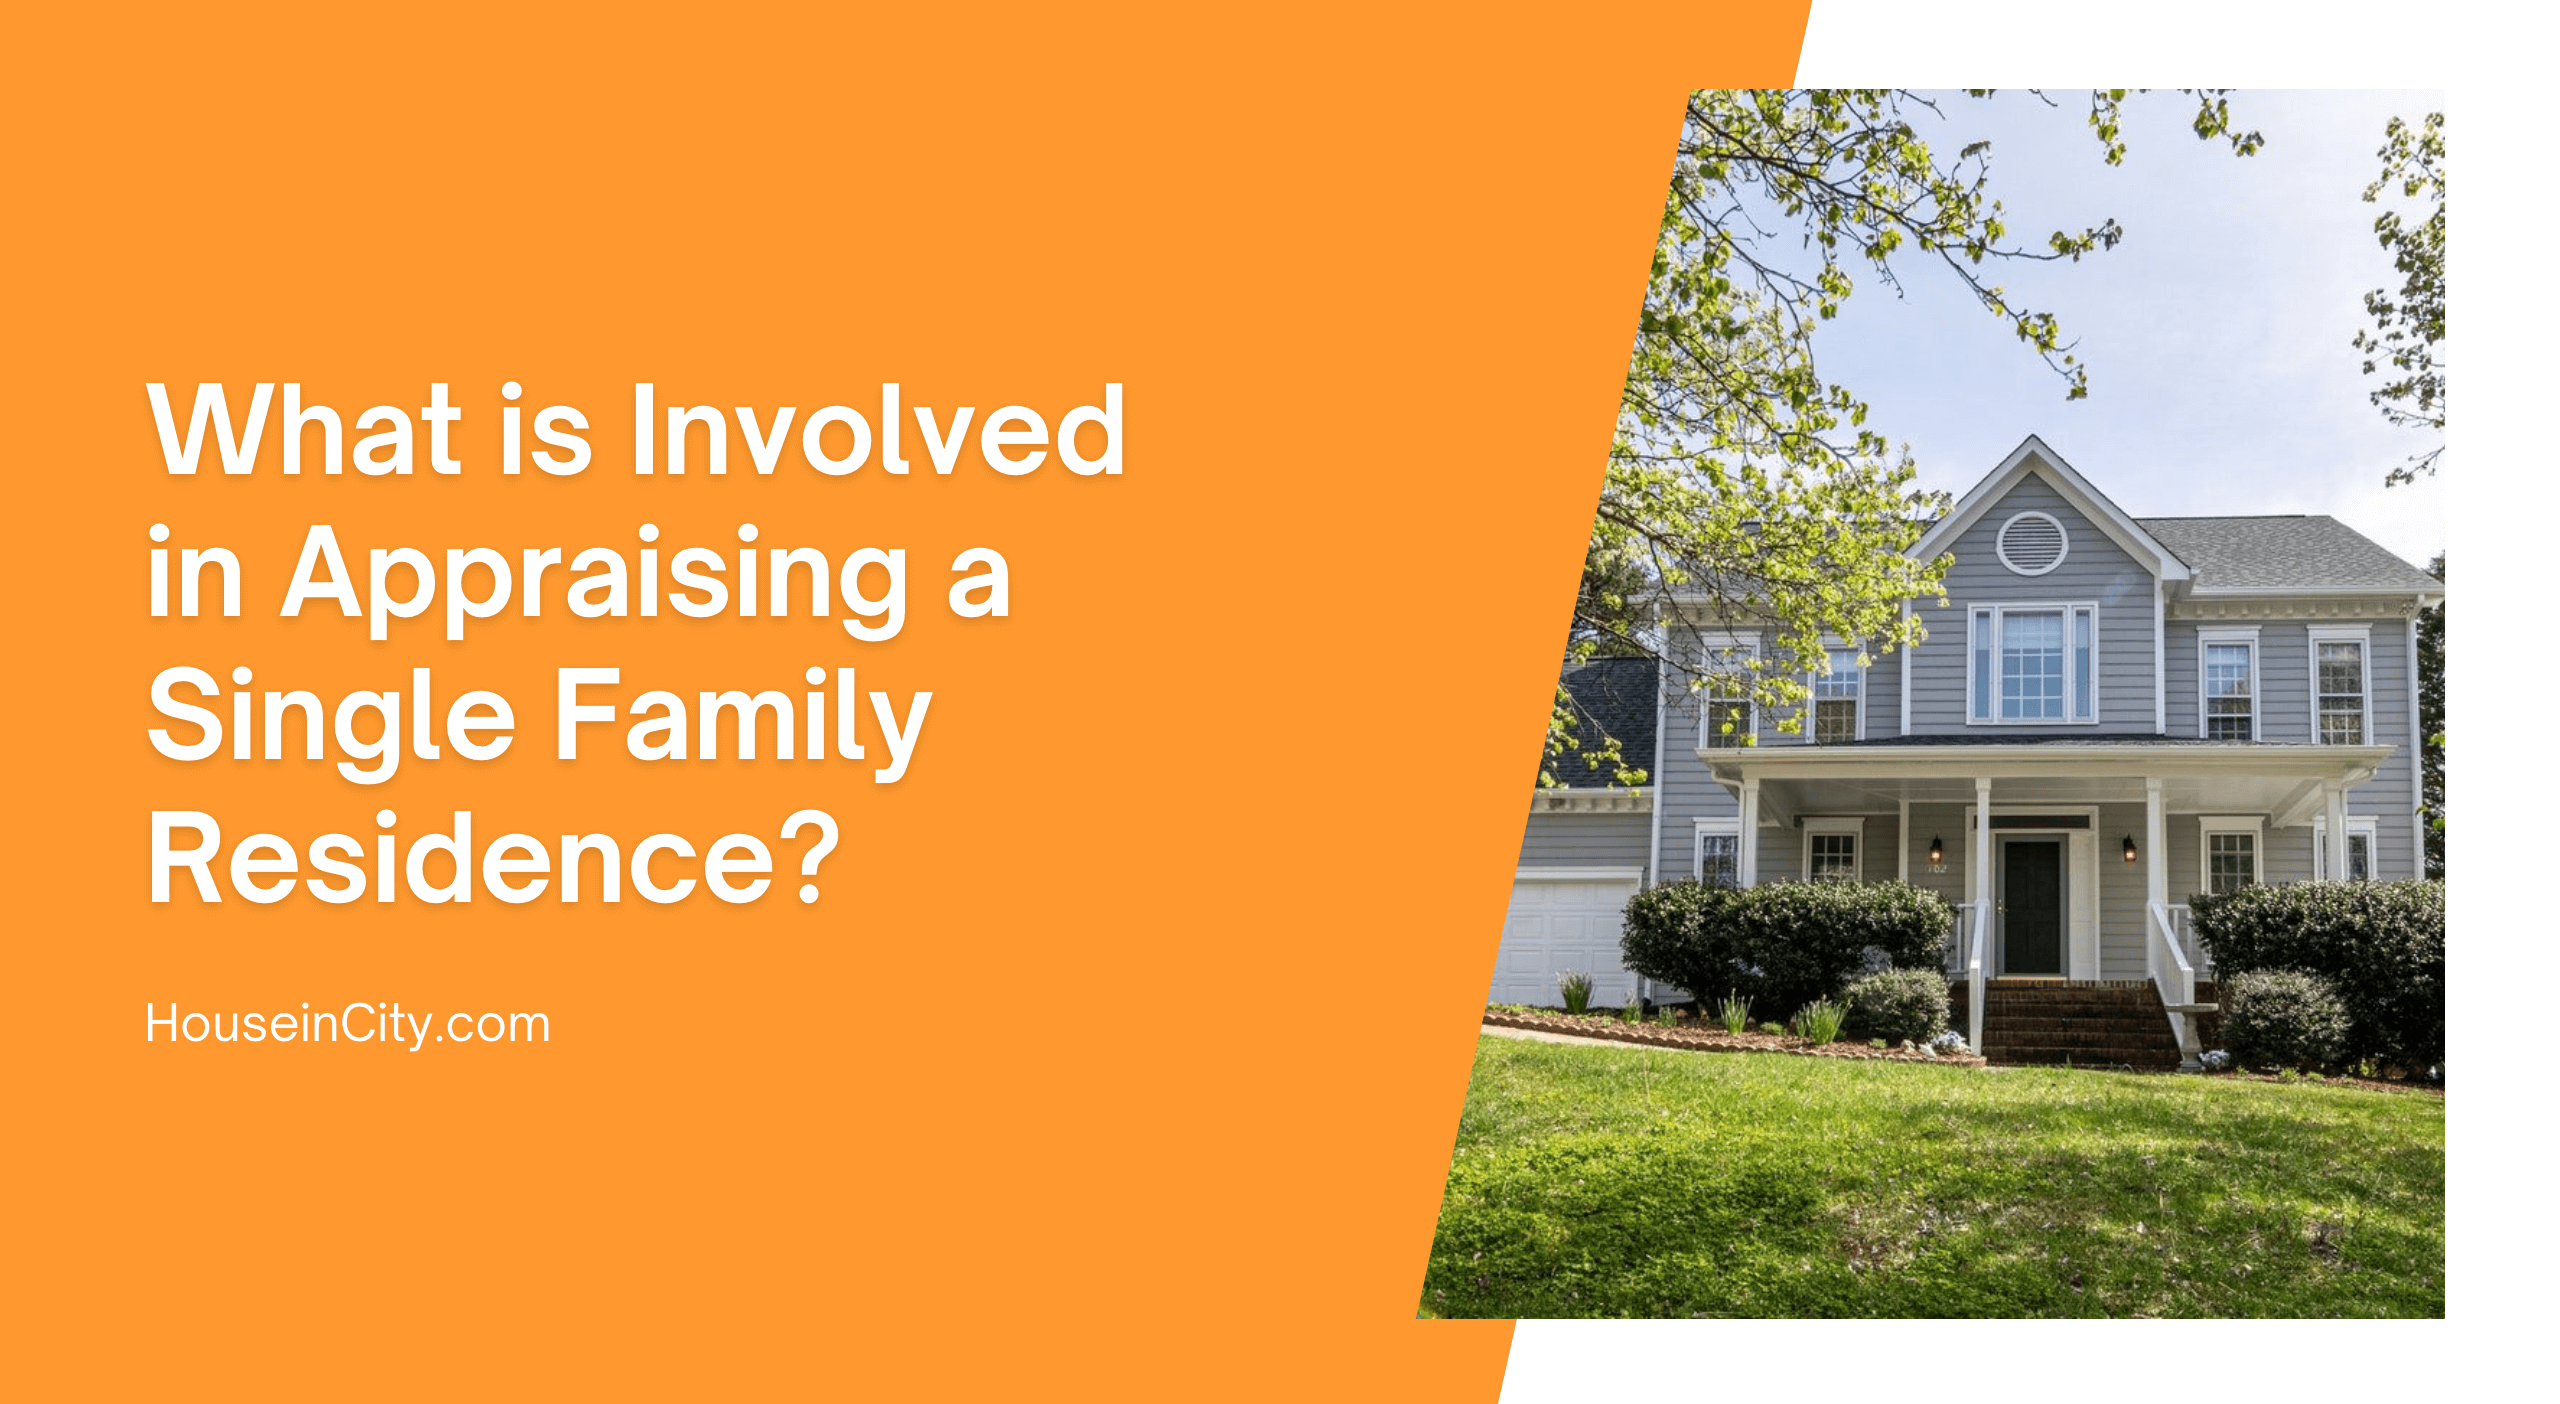 What is Involved in Appraising a Single Family Residence?